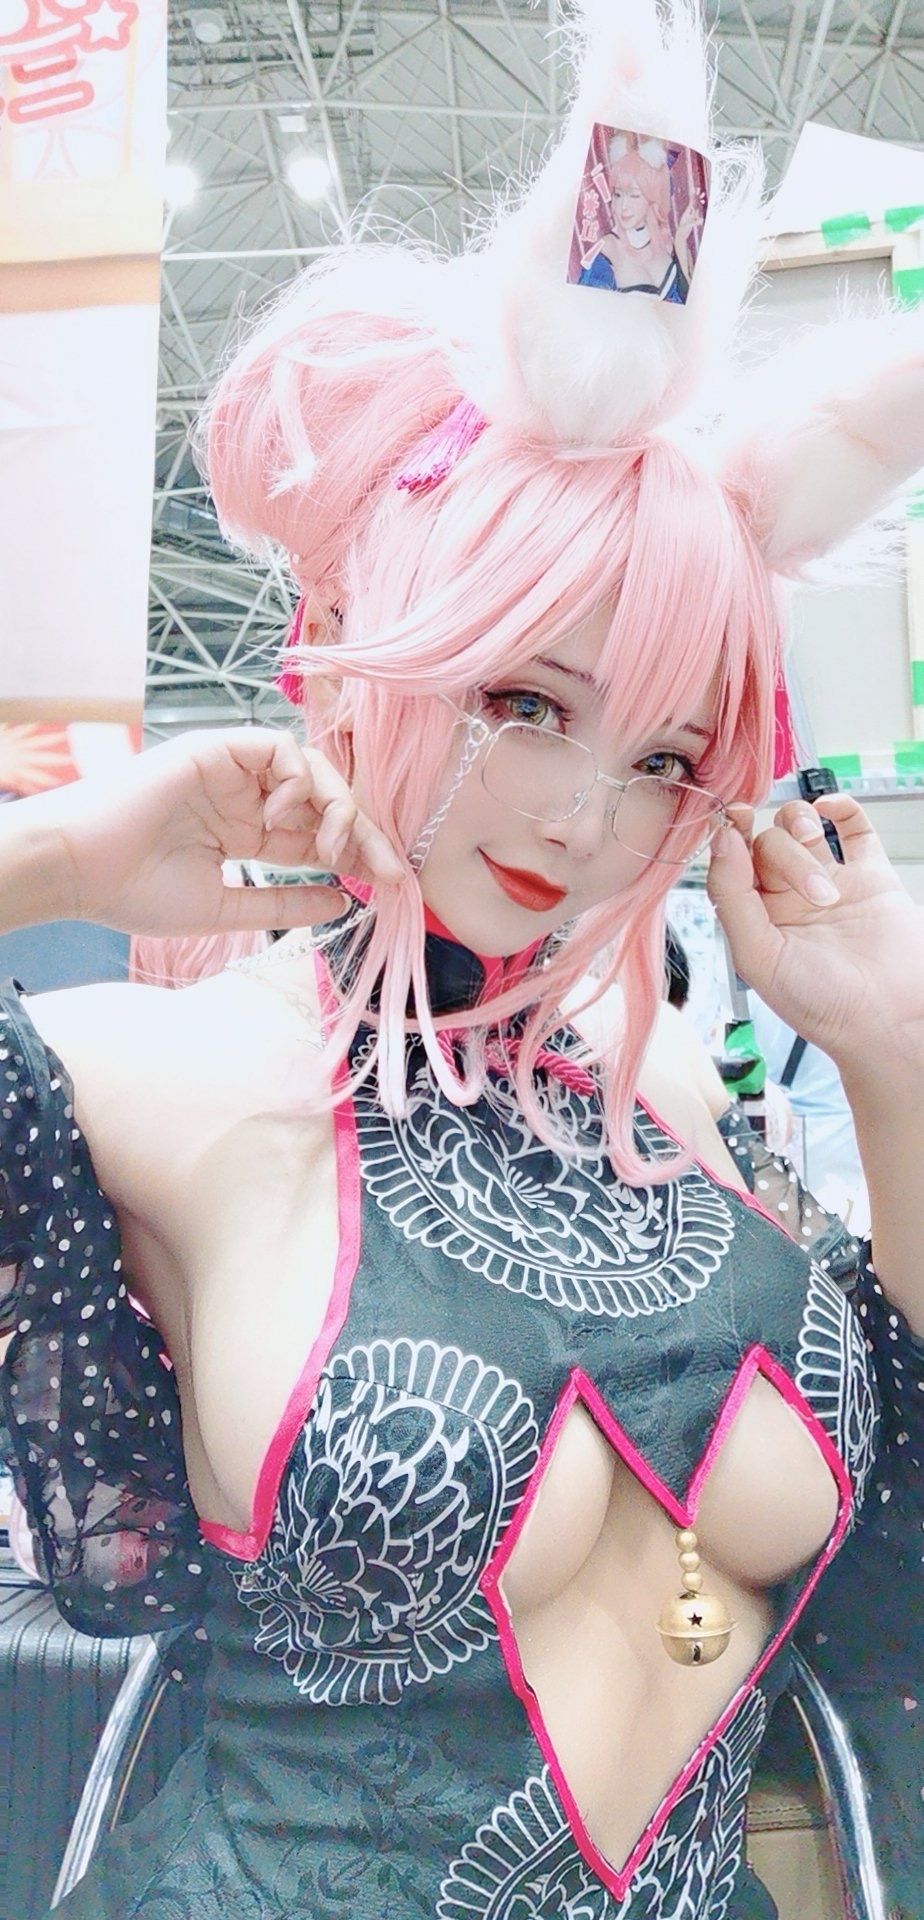 Recently the most erotic female cosplayer image wwwwwwwww 6